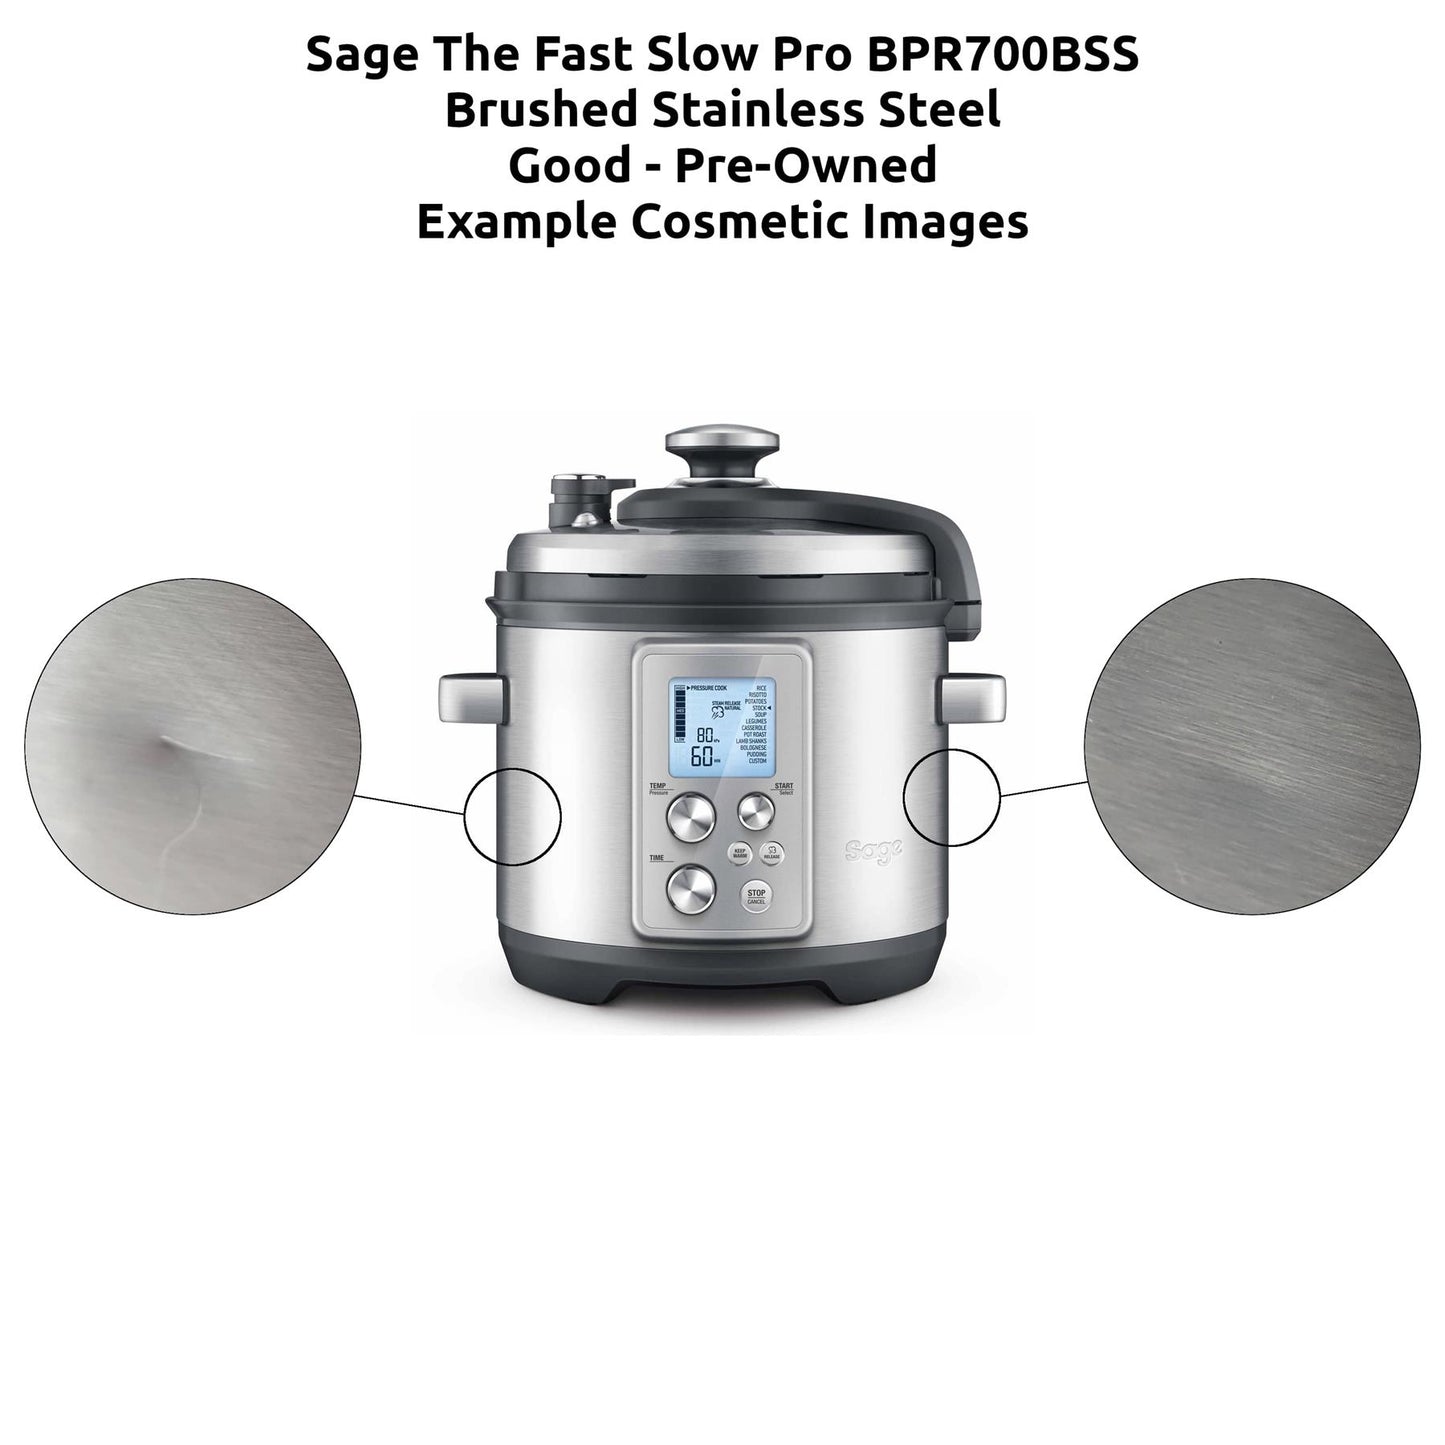 Sage The Fast Slow Pro BPR700 Multi Cooker